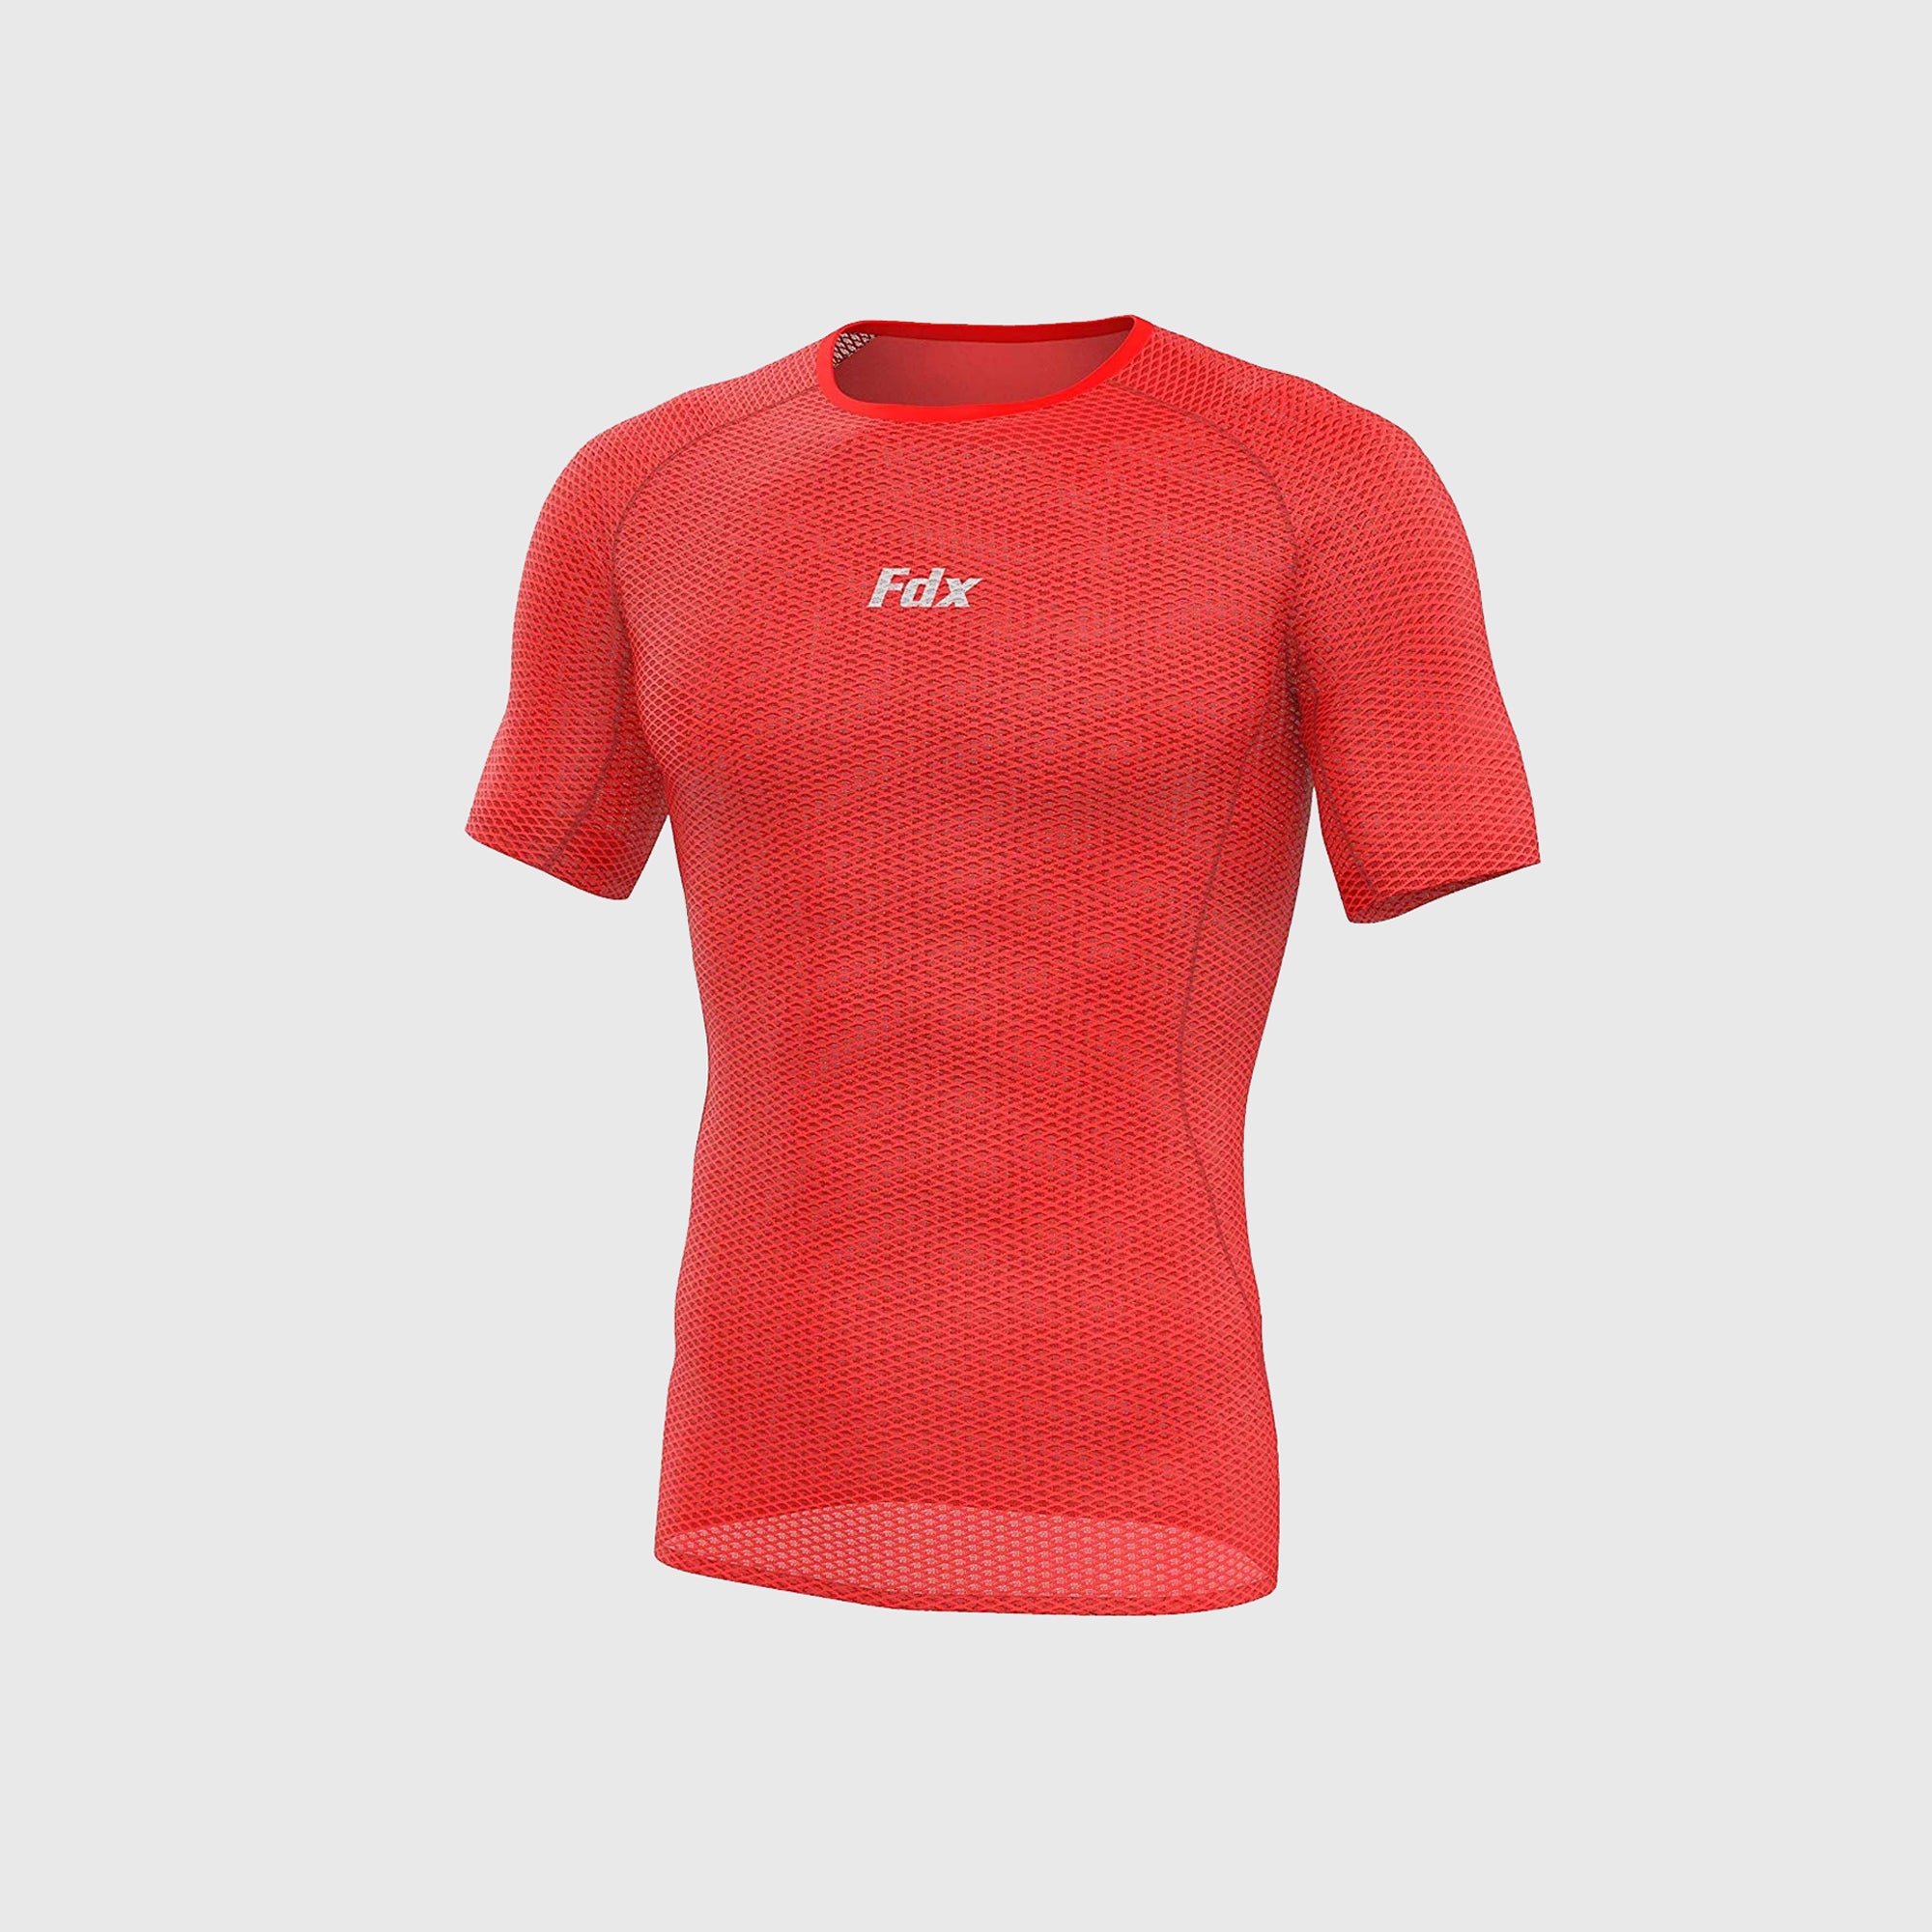 Fdx Mens Red Short Sleeve Mesh Compression Top Running Gym Workout Wear Rash Guard Stretchable Breathable - Aeroform